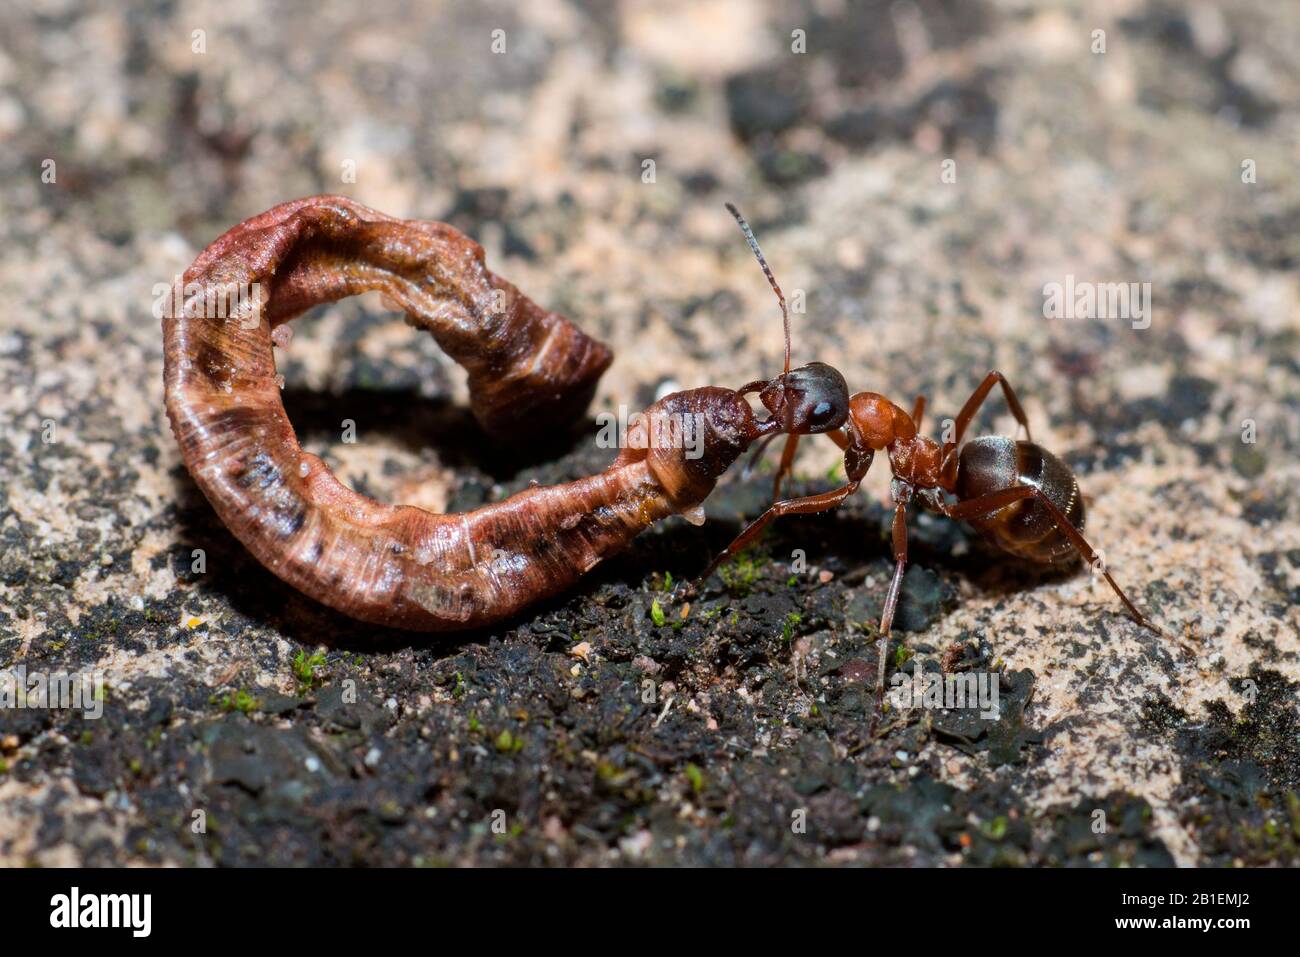 Southern wood ant (Formica rufa) with a dried earthworm, Vosges du Nord Regional Natural Park, France Stock Photo